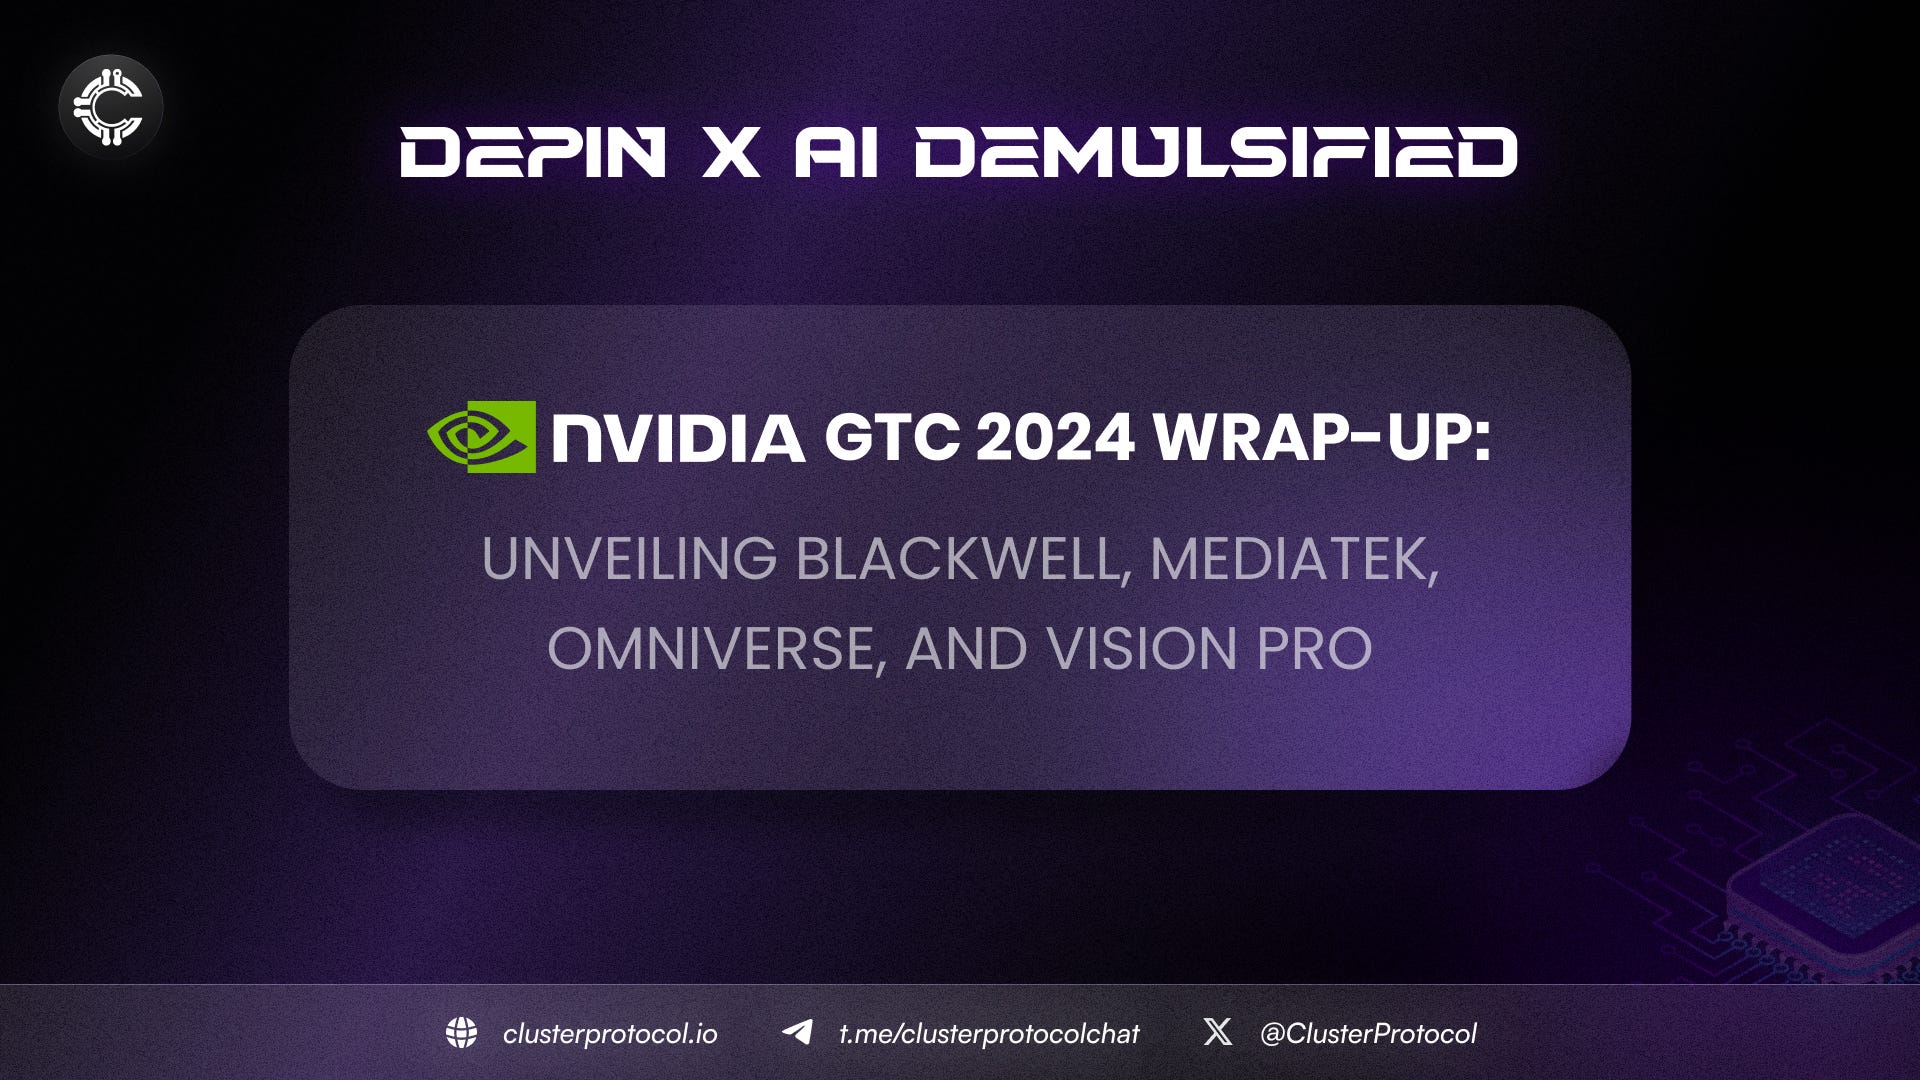 Nvidia GTC 2024 Wrap-up, unveiling Blackwell, Mediatek, Omniverse and Vision Pro